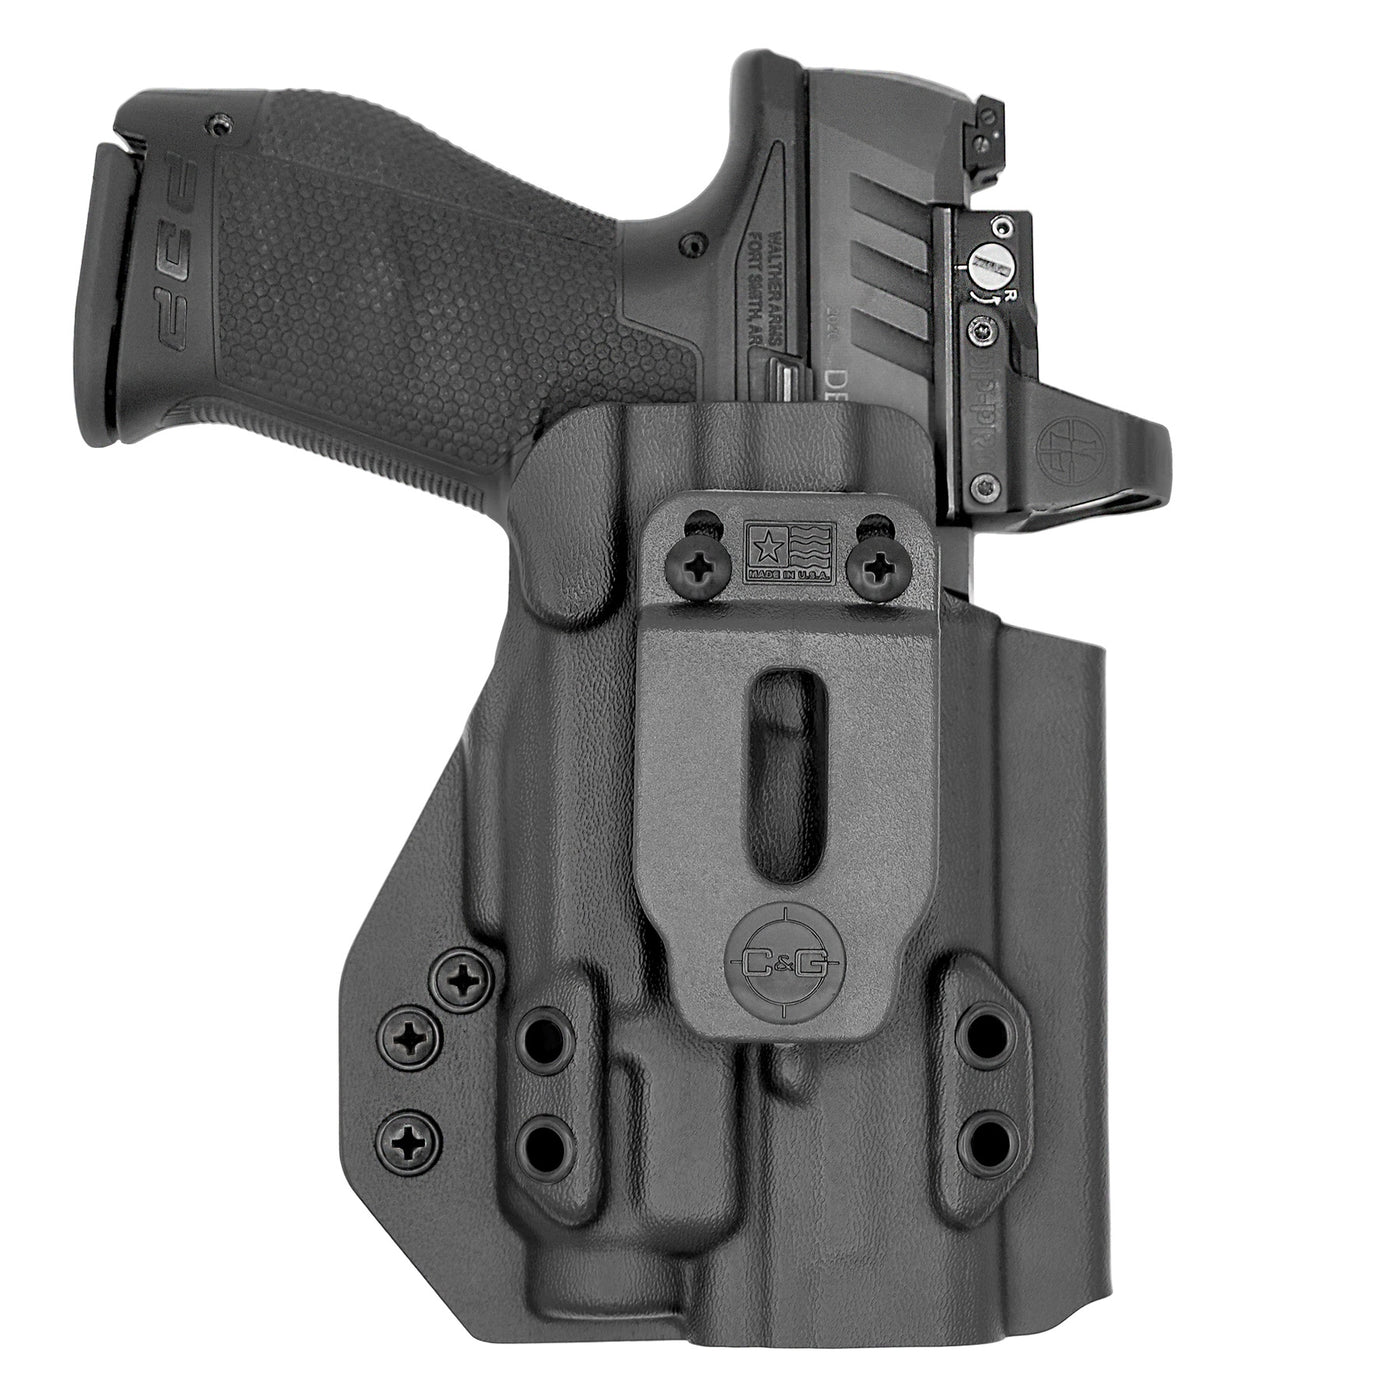 C&G Holsters custom IWB Tactical H&K P30/sk streamlight tlr7/a in holstered position